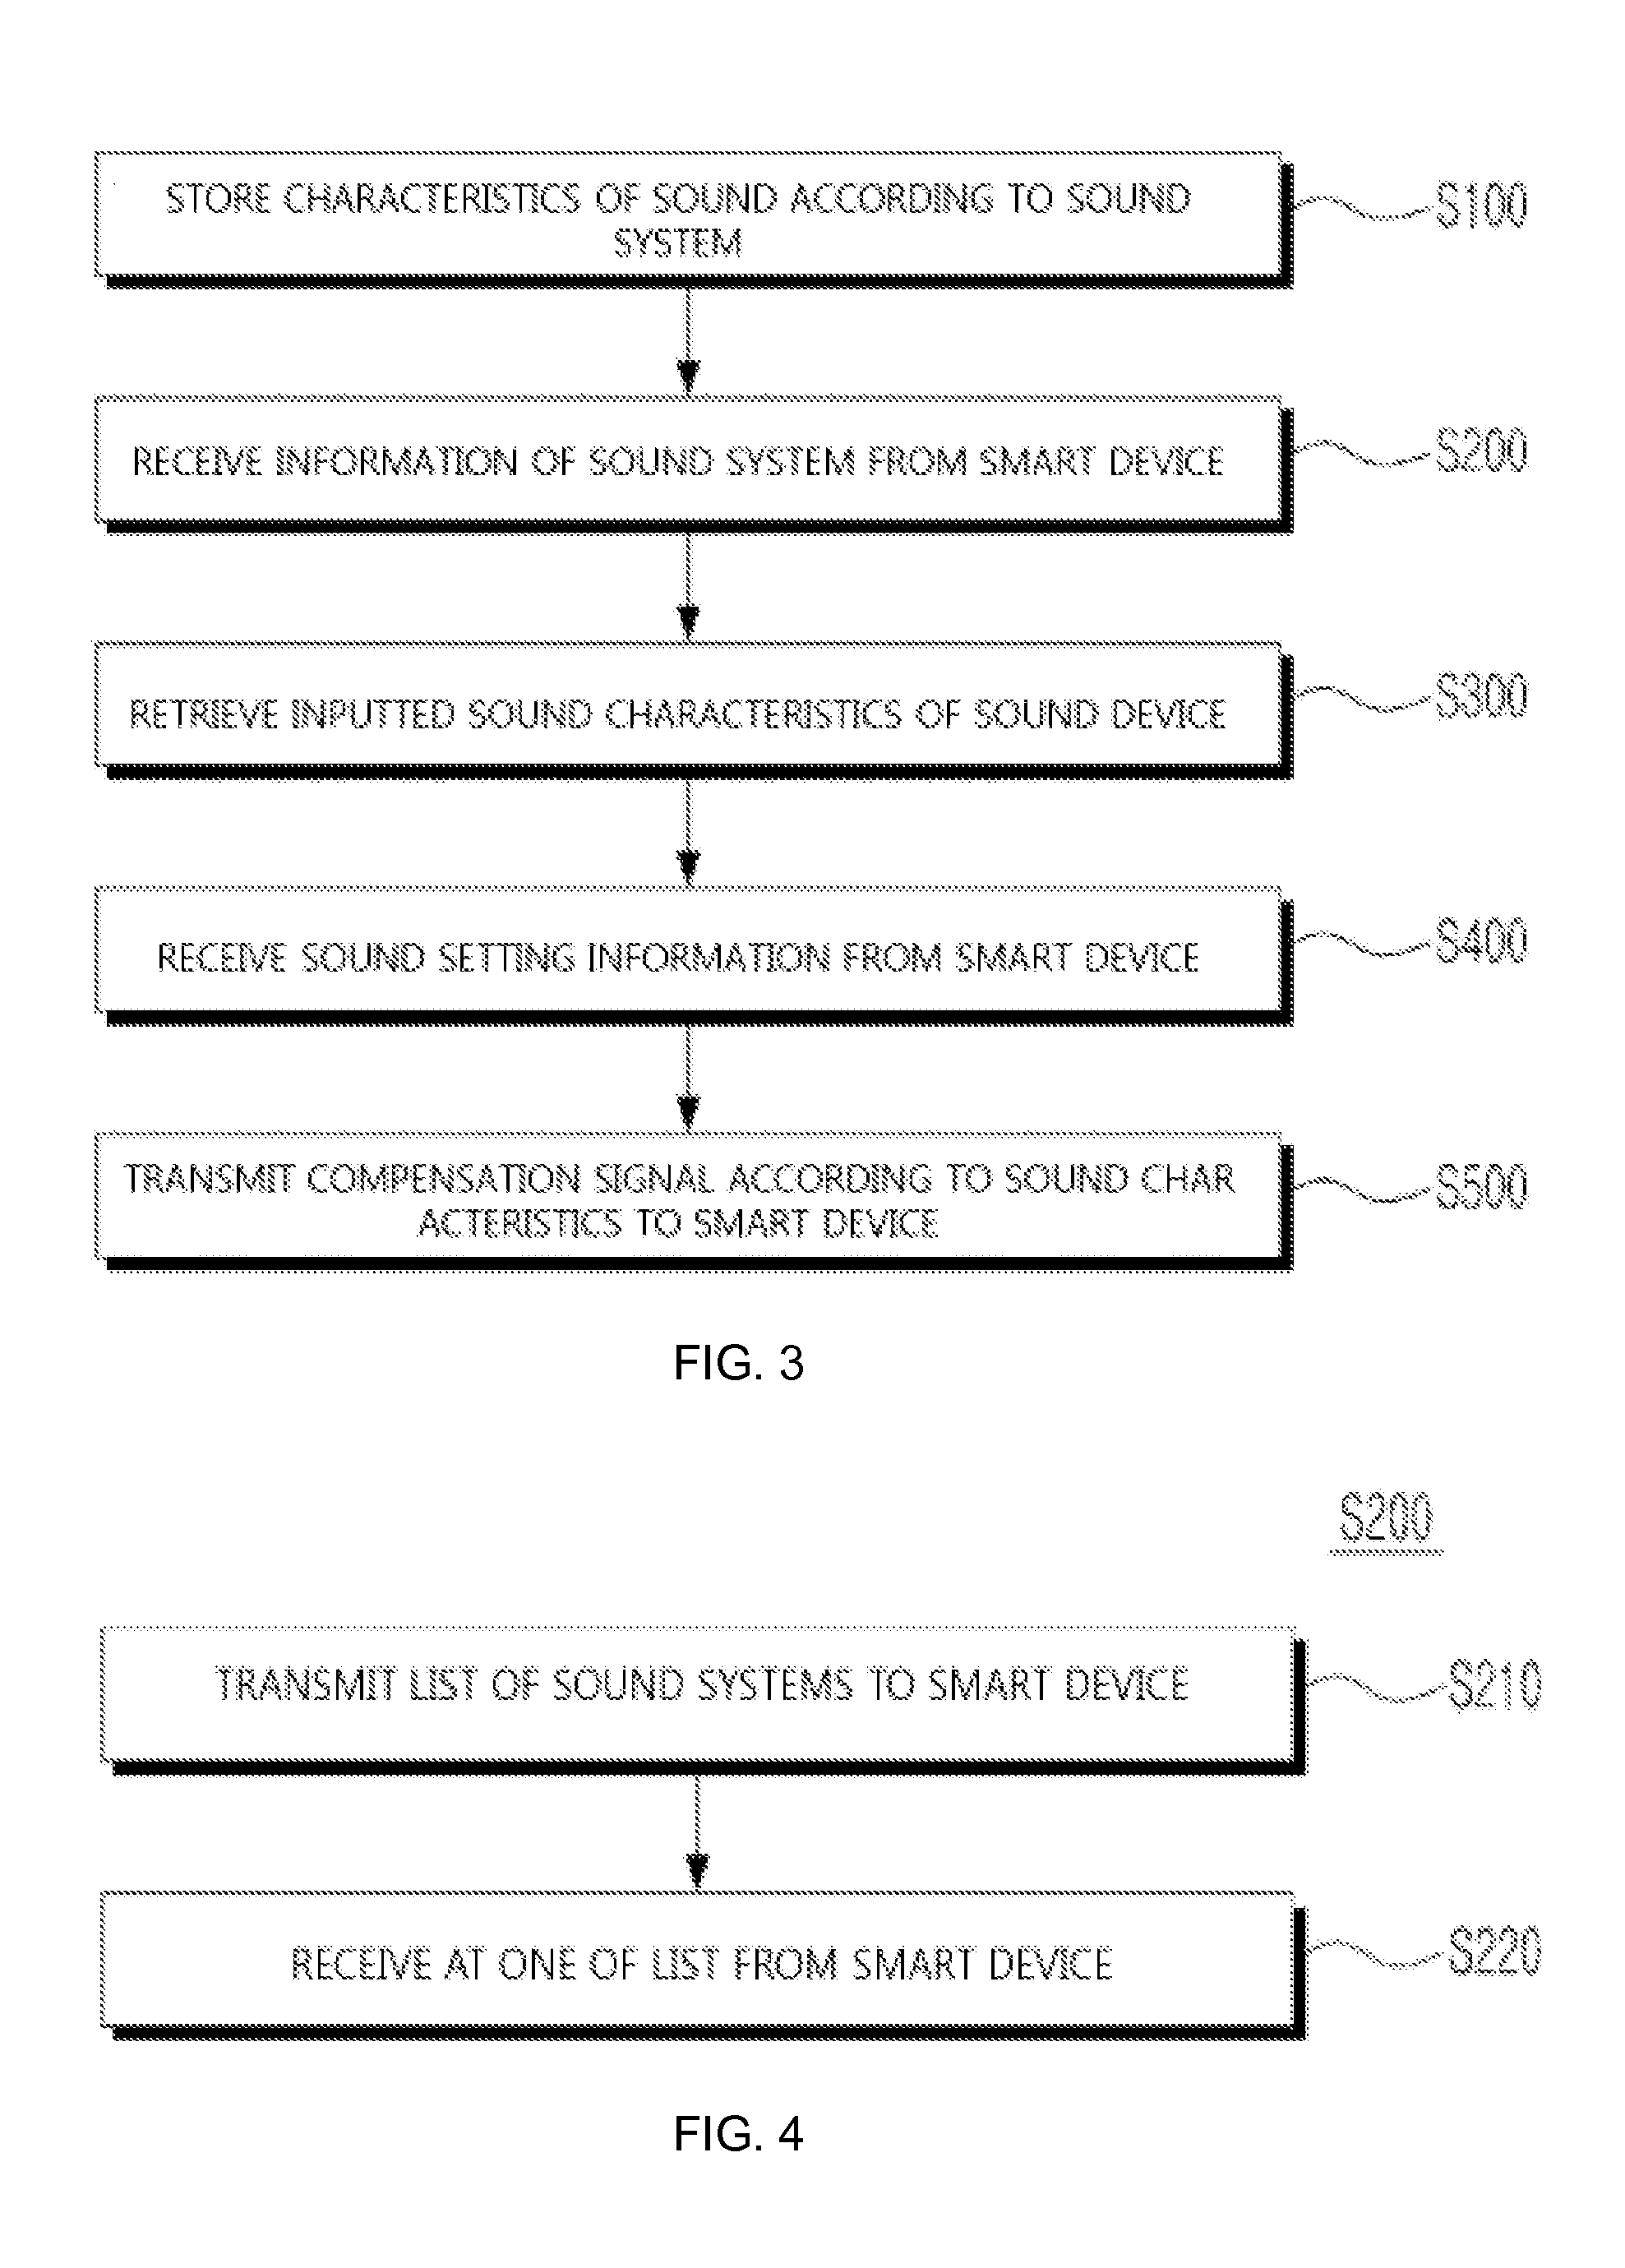 Method for providing a compensation service for characteristics of an audio device using a smart device